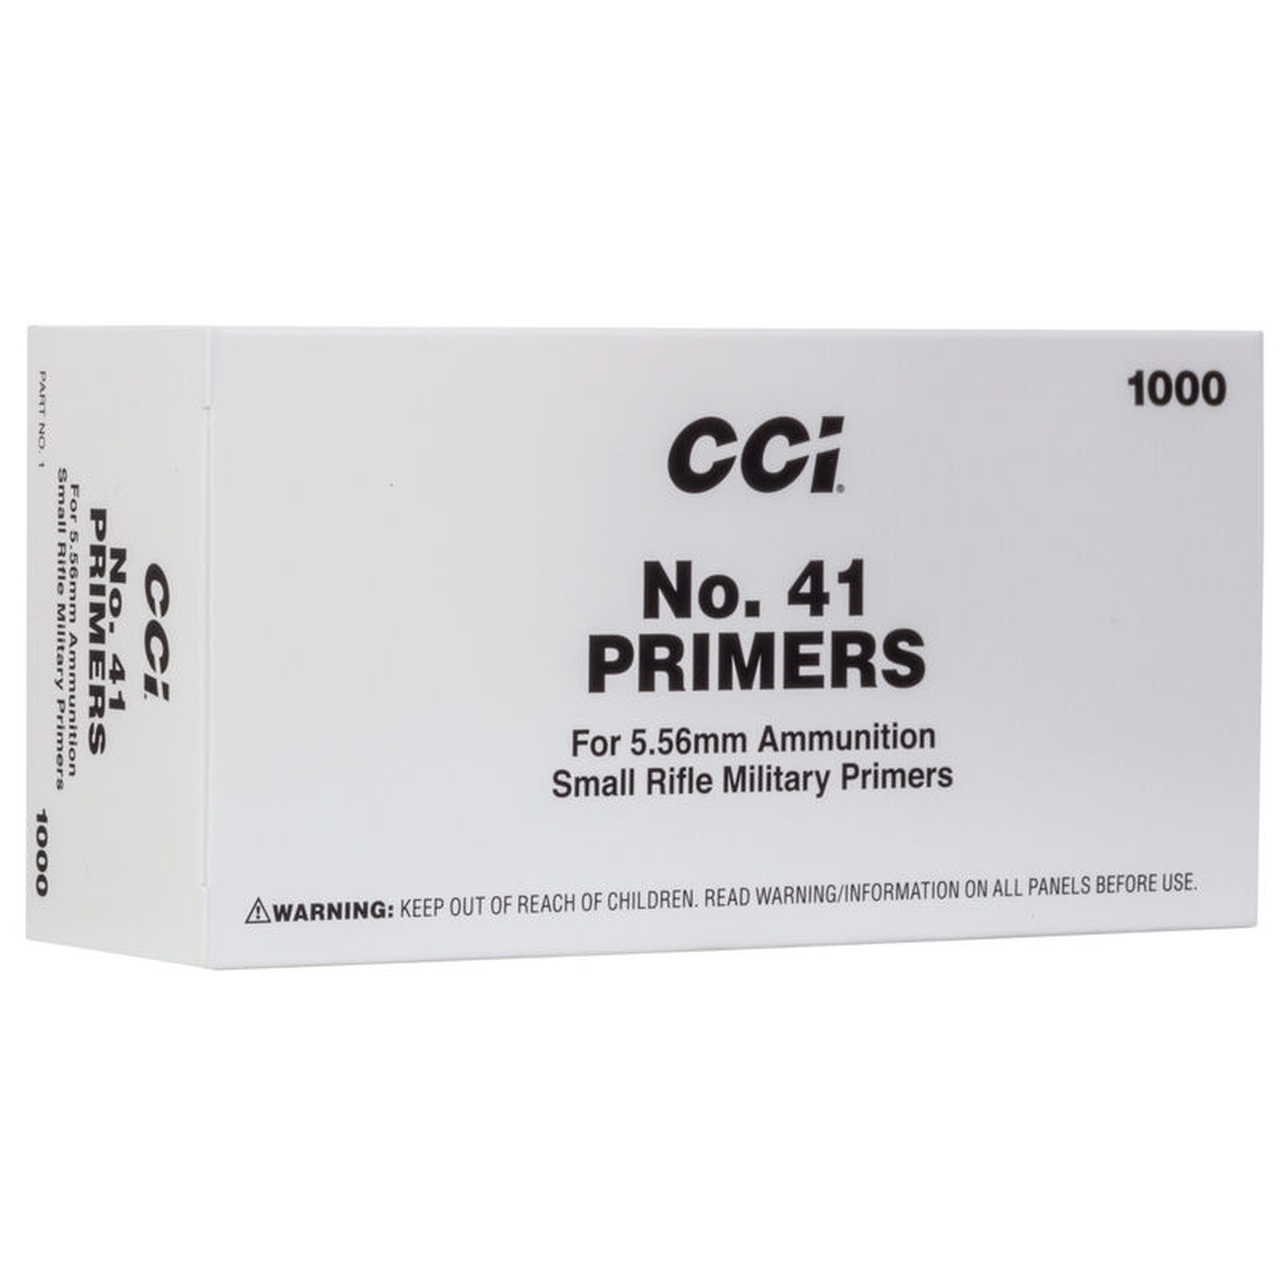 CCI Mil-Spec No. 41 5.56 Small Rifle Military Primers 1000ct Brick #50001 **CANNOT SHIP** - Dunns Sporting Goods